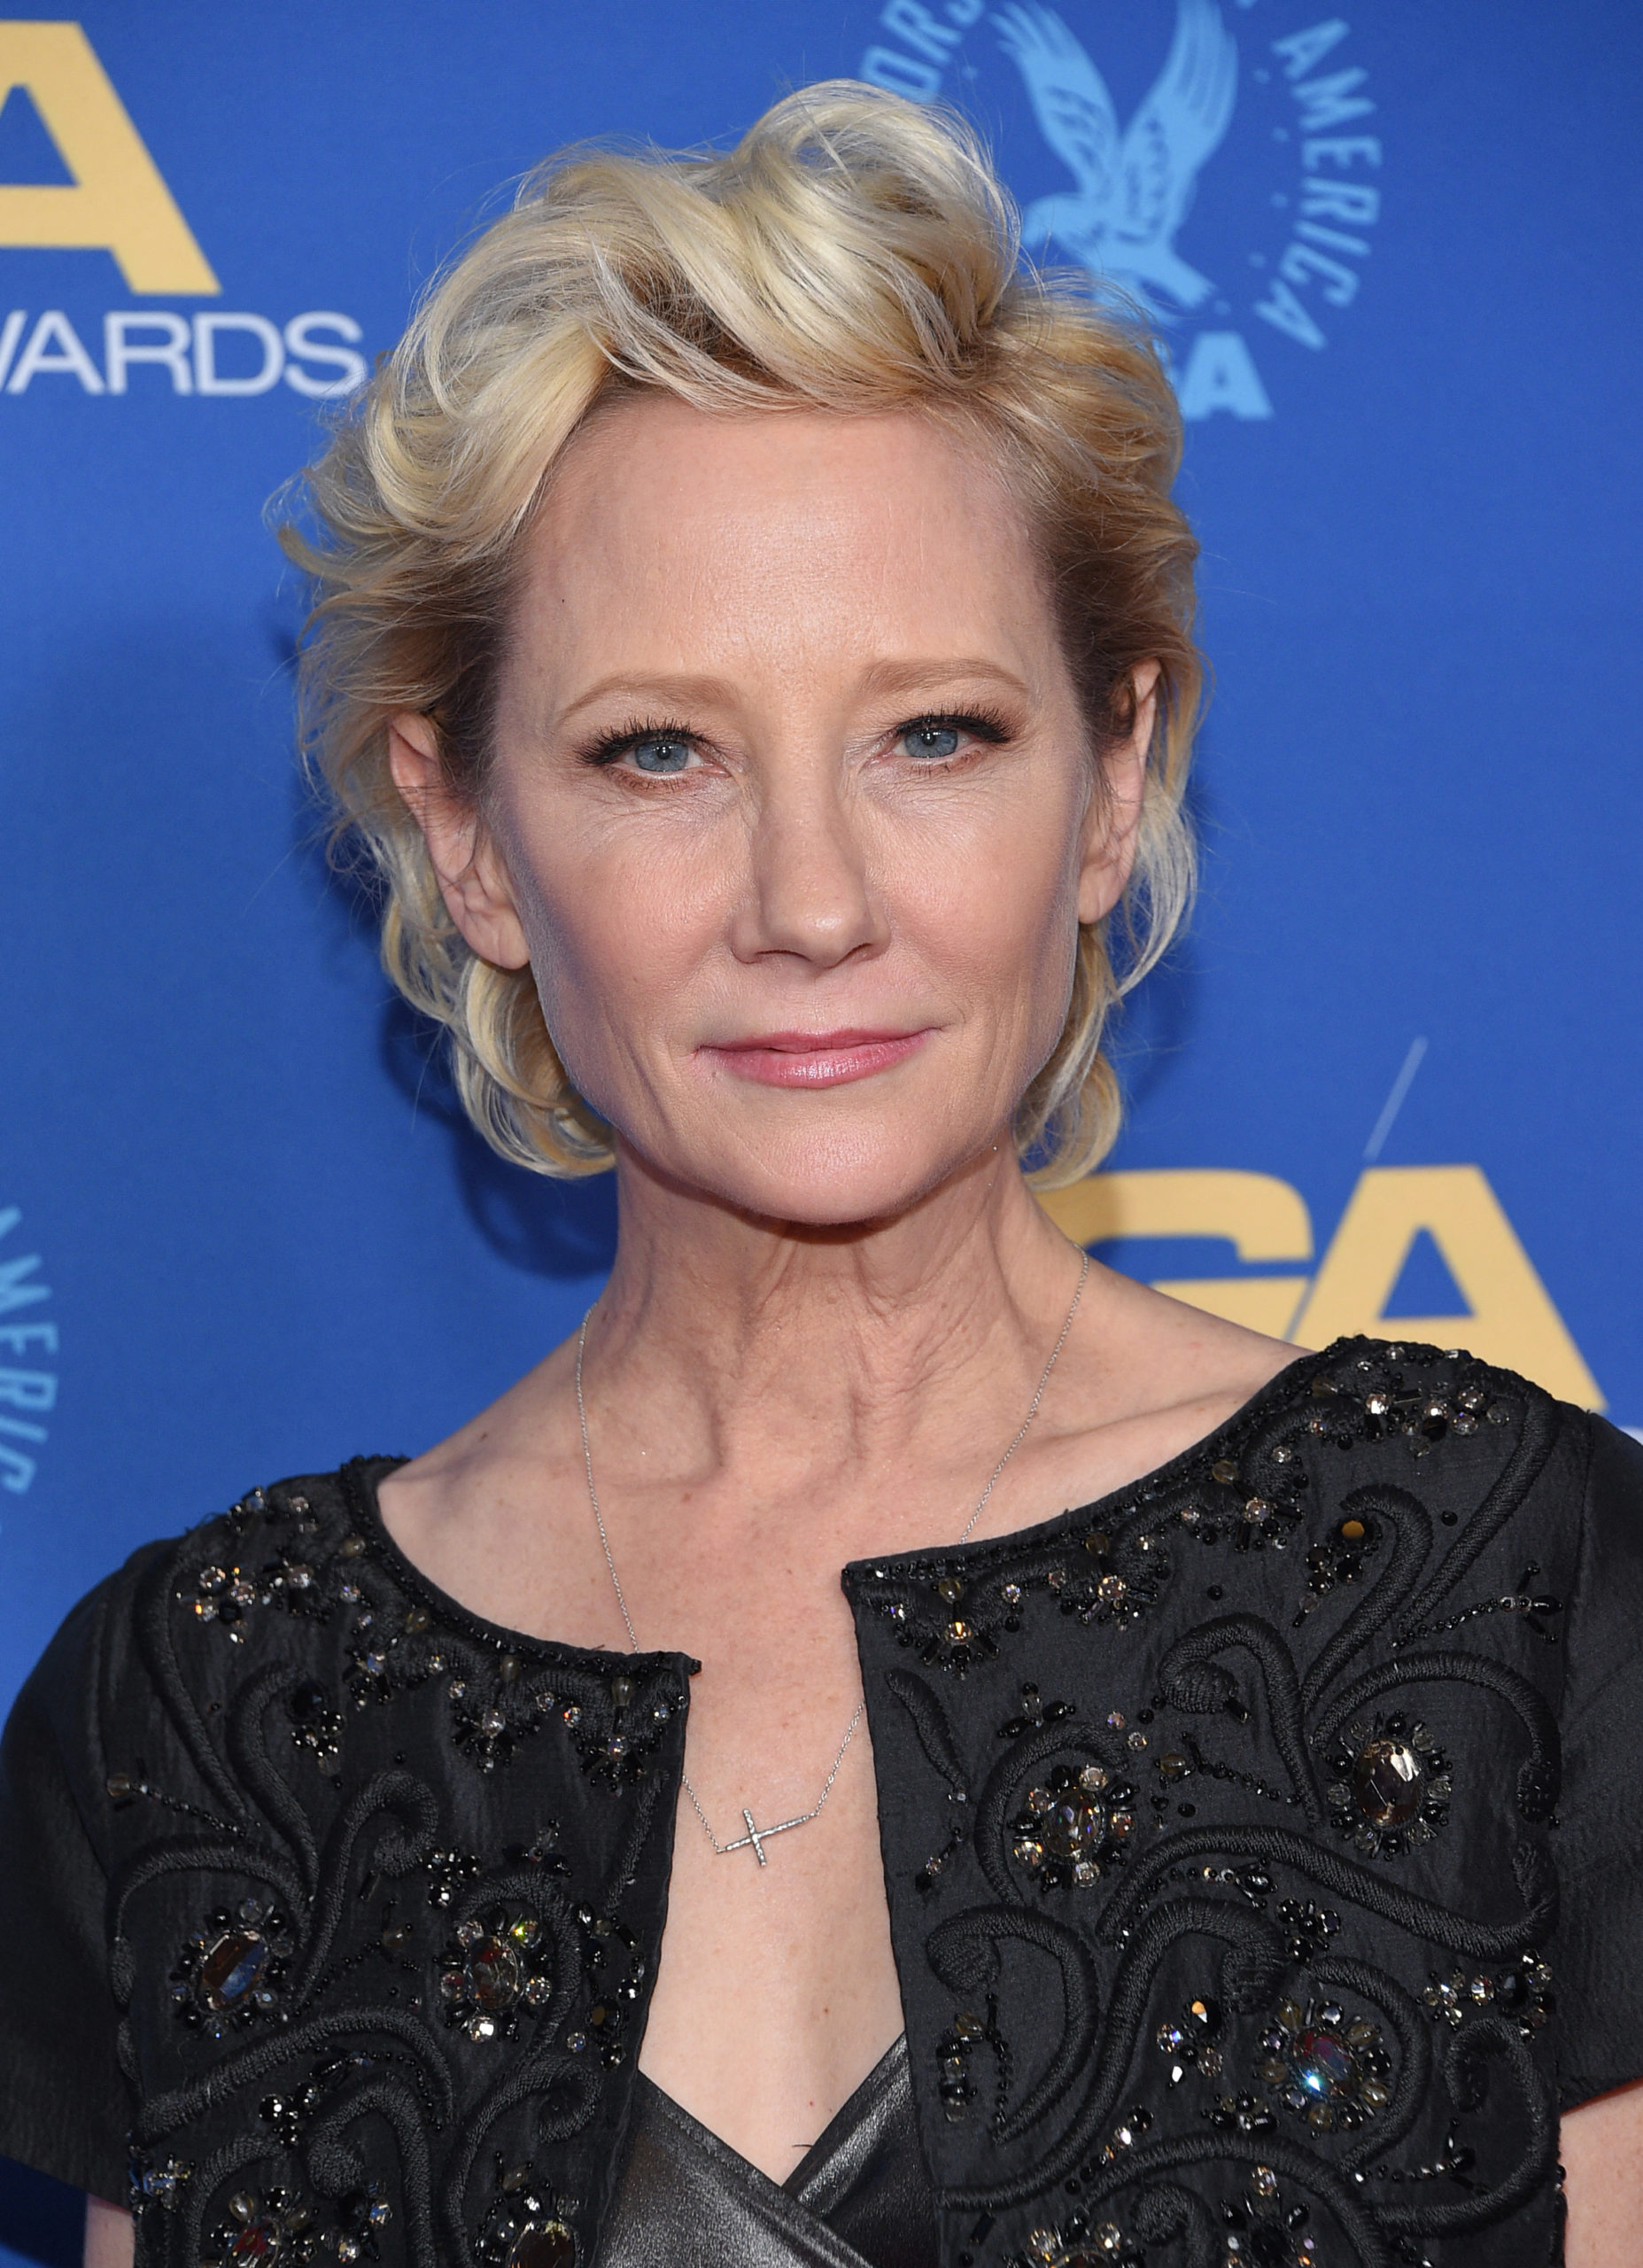 Anne Heche has been declared "brain dead" one week after she crashed her car into a Los Angeles building